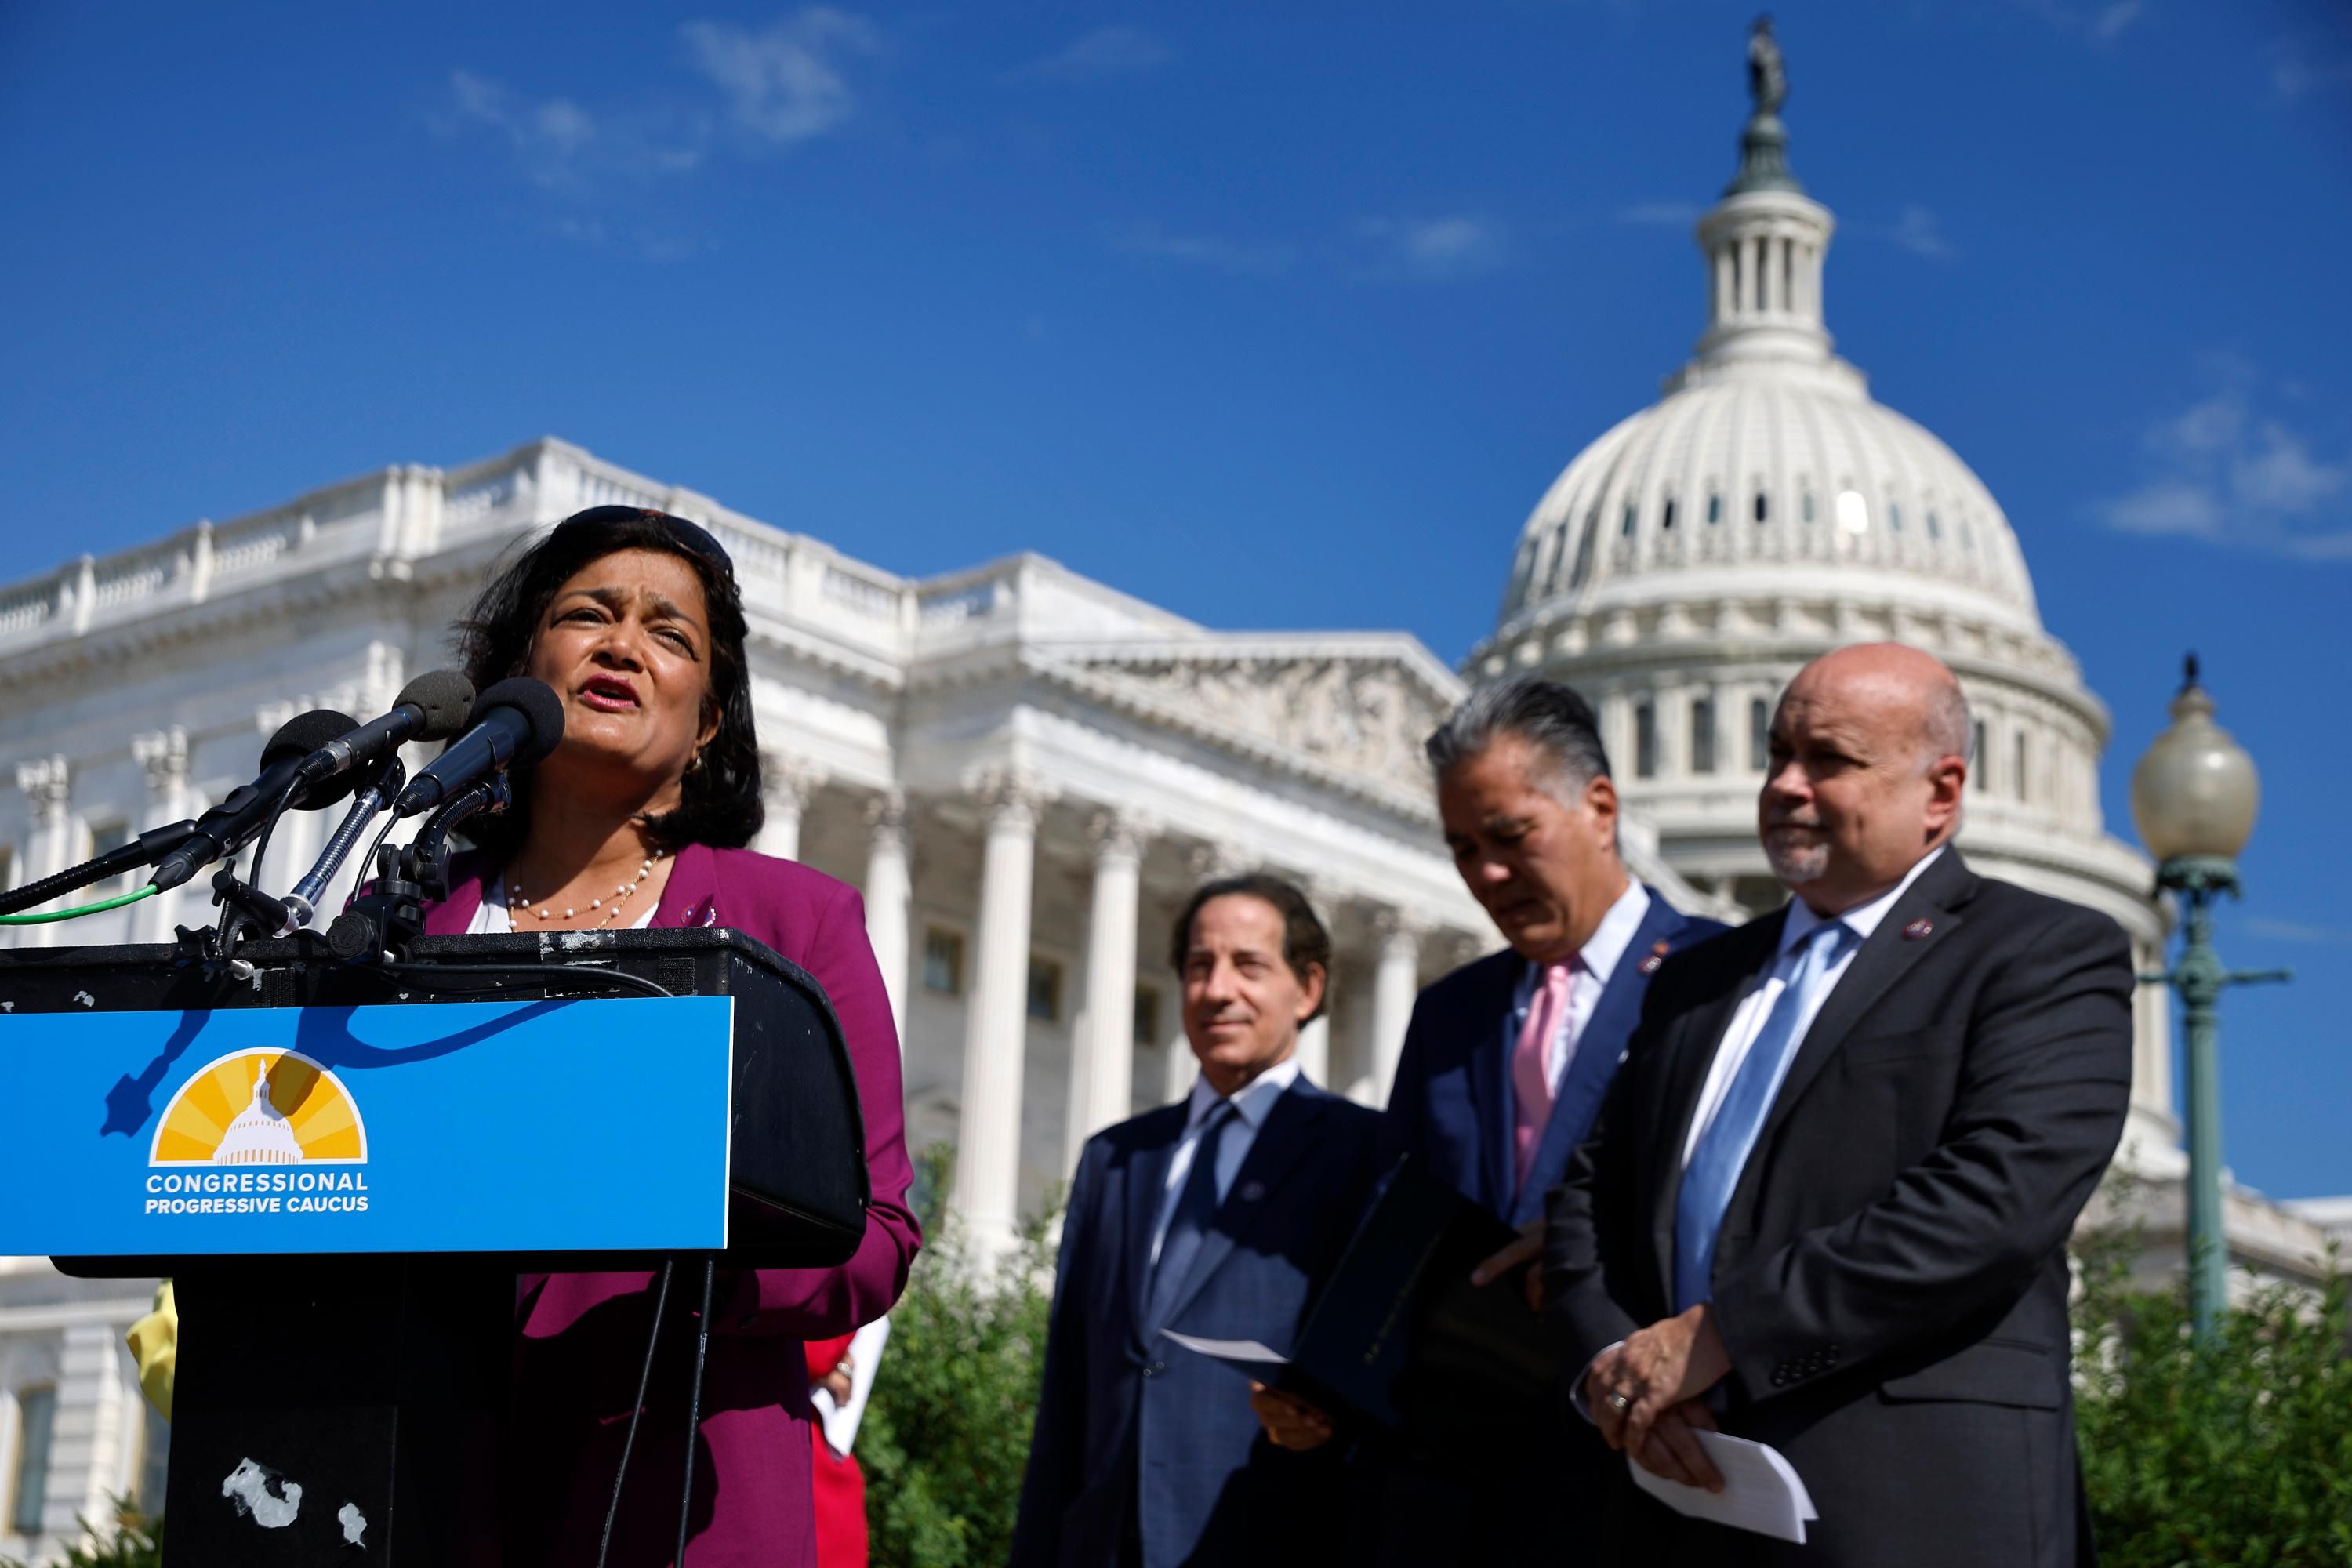 Rep. Pramila Jayapal speaks at a press conference outside the U.S. Capitol